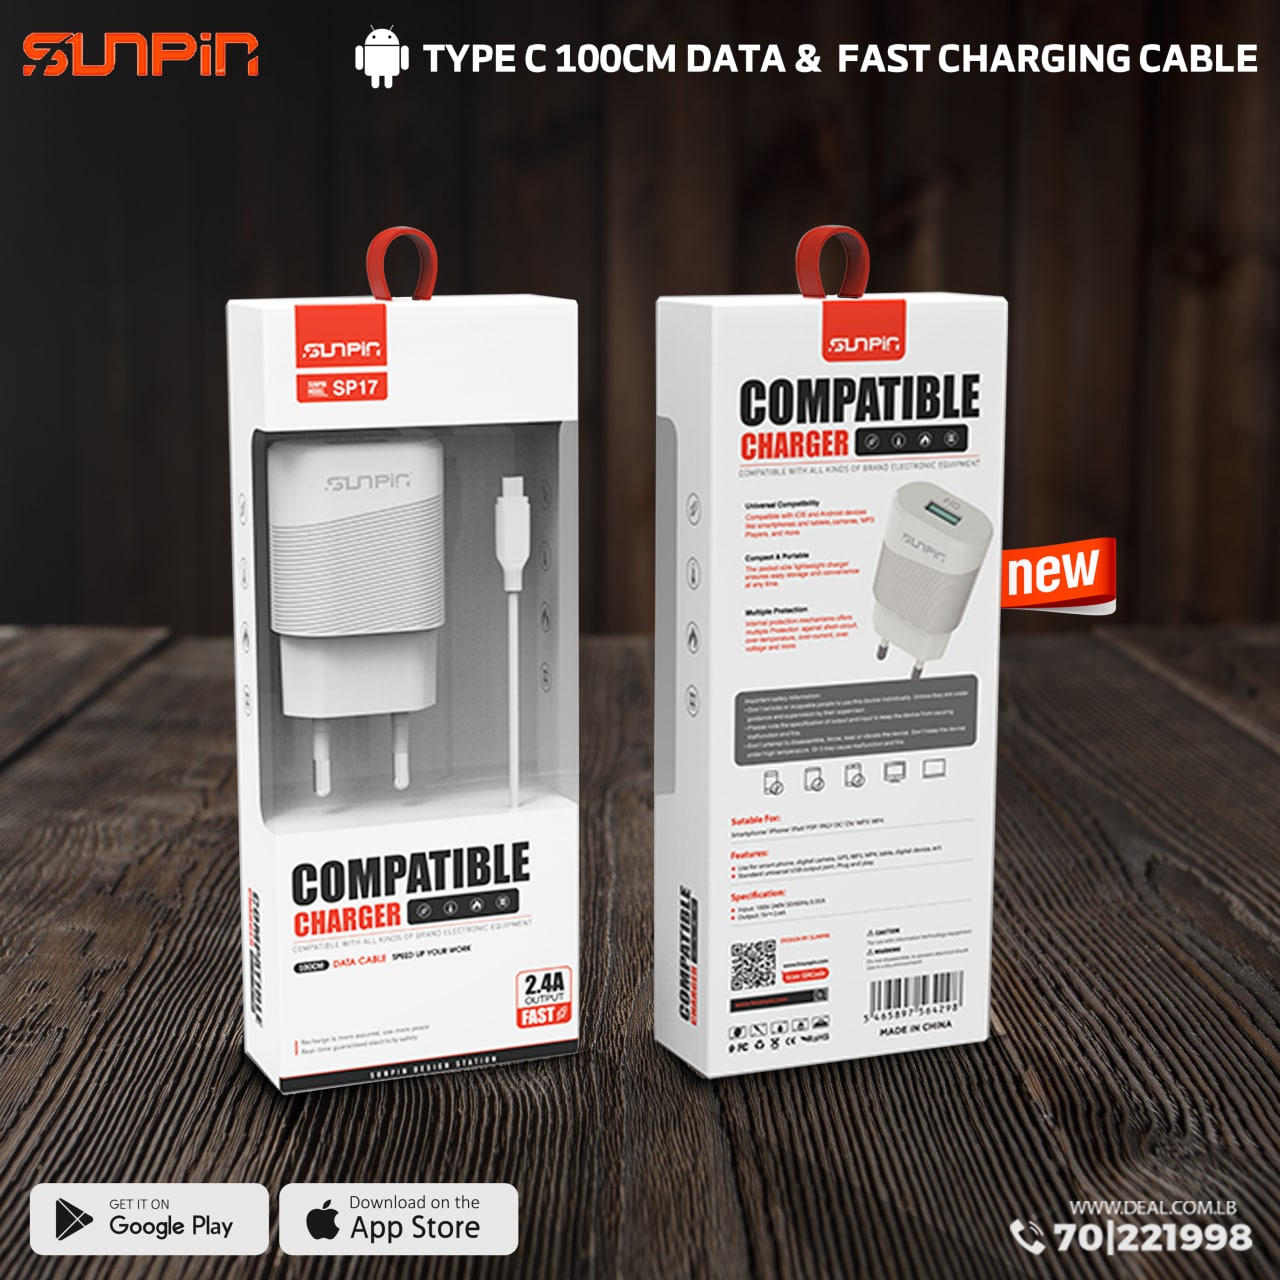 Sunpin SP17 Type-C 100CM Data & Fast Charging Cable 2.4A OUTPUT